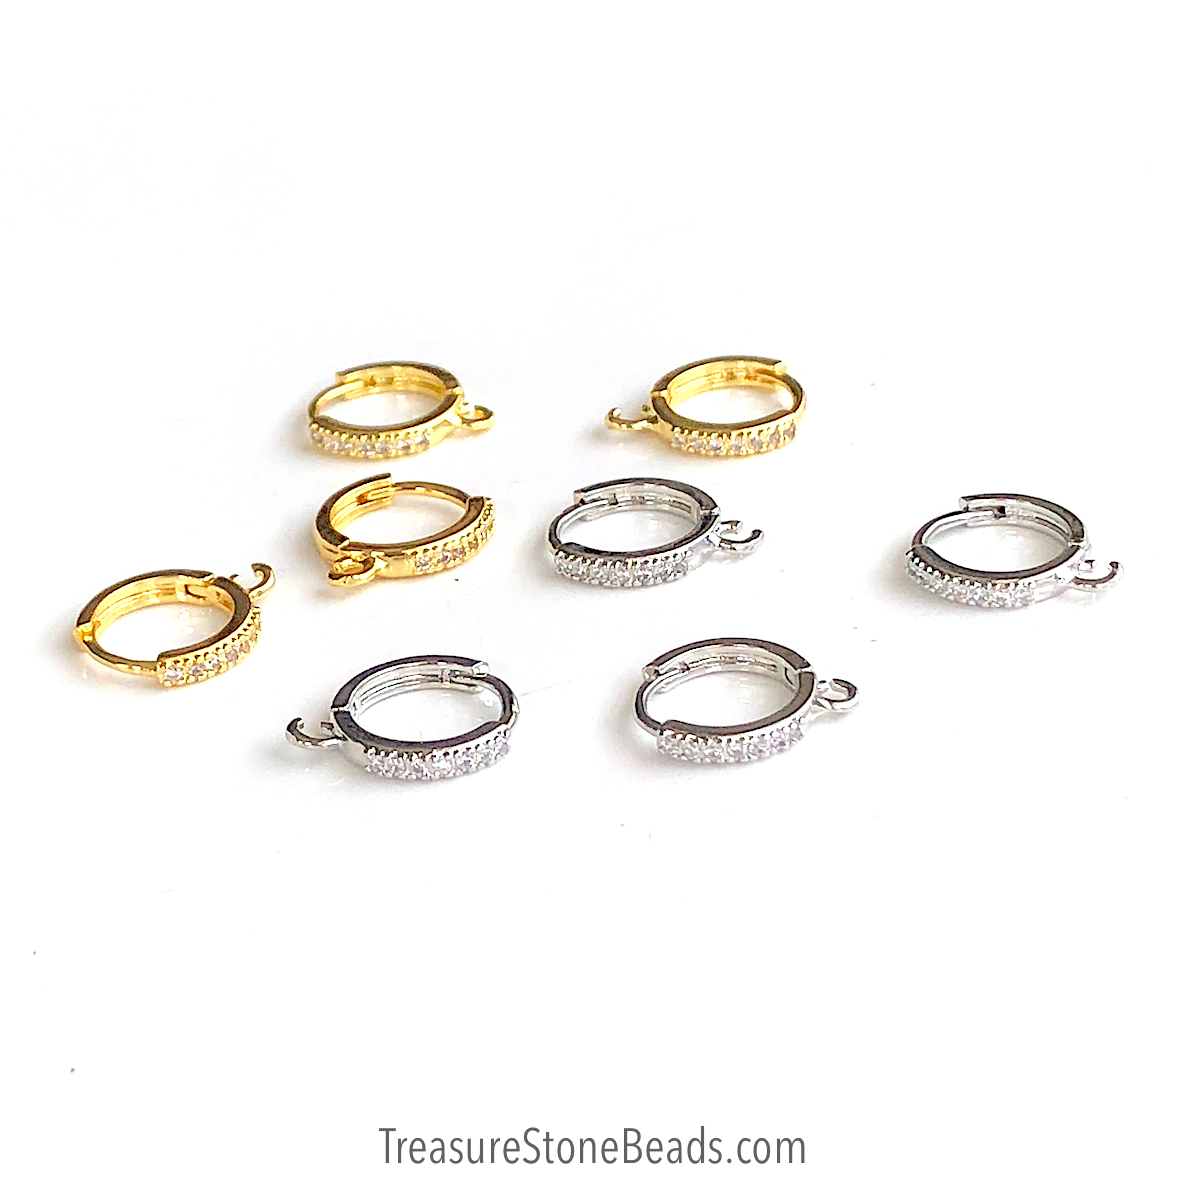 Pave Earring, gold-plated brass, CZ, 12mm round hoop. 1 pair